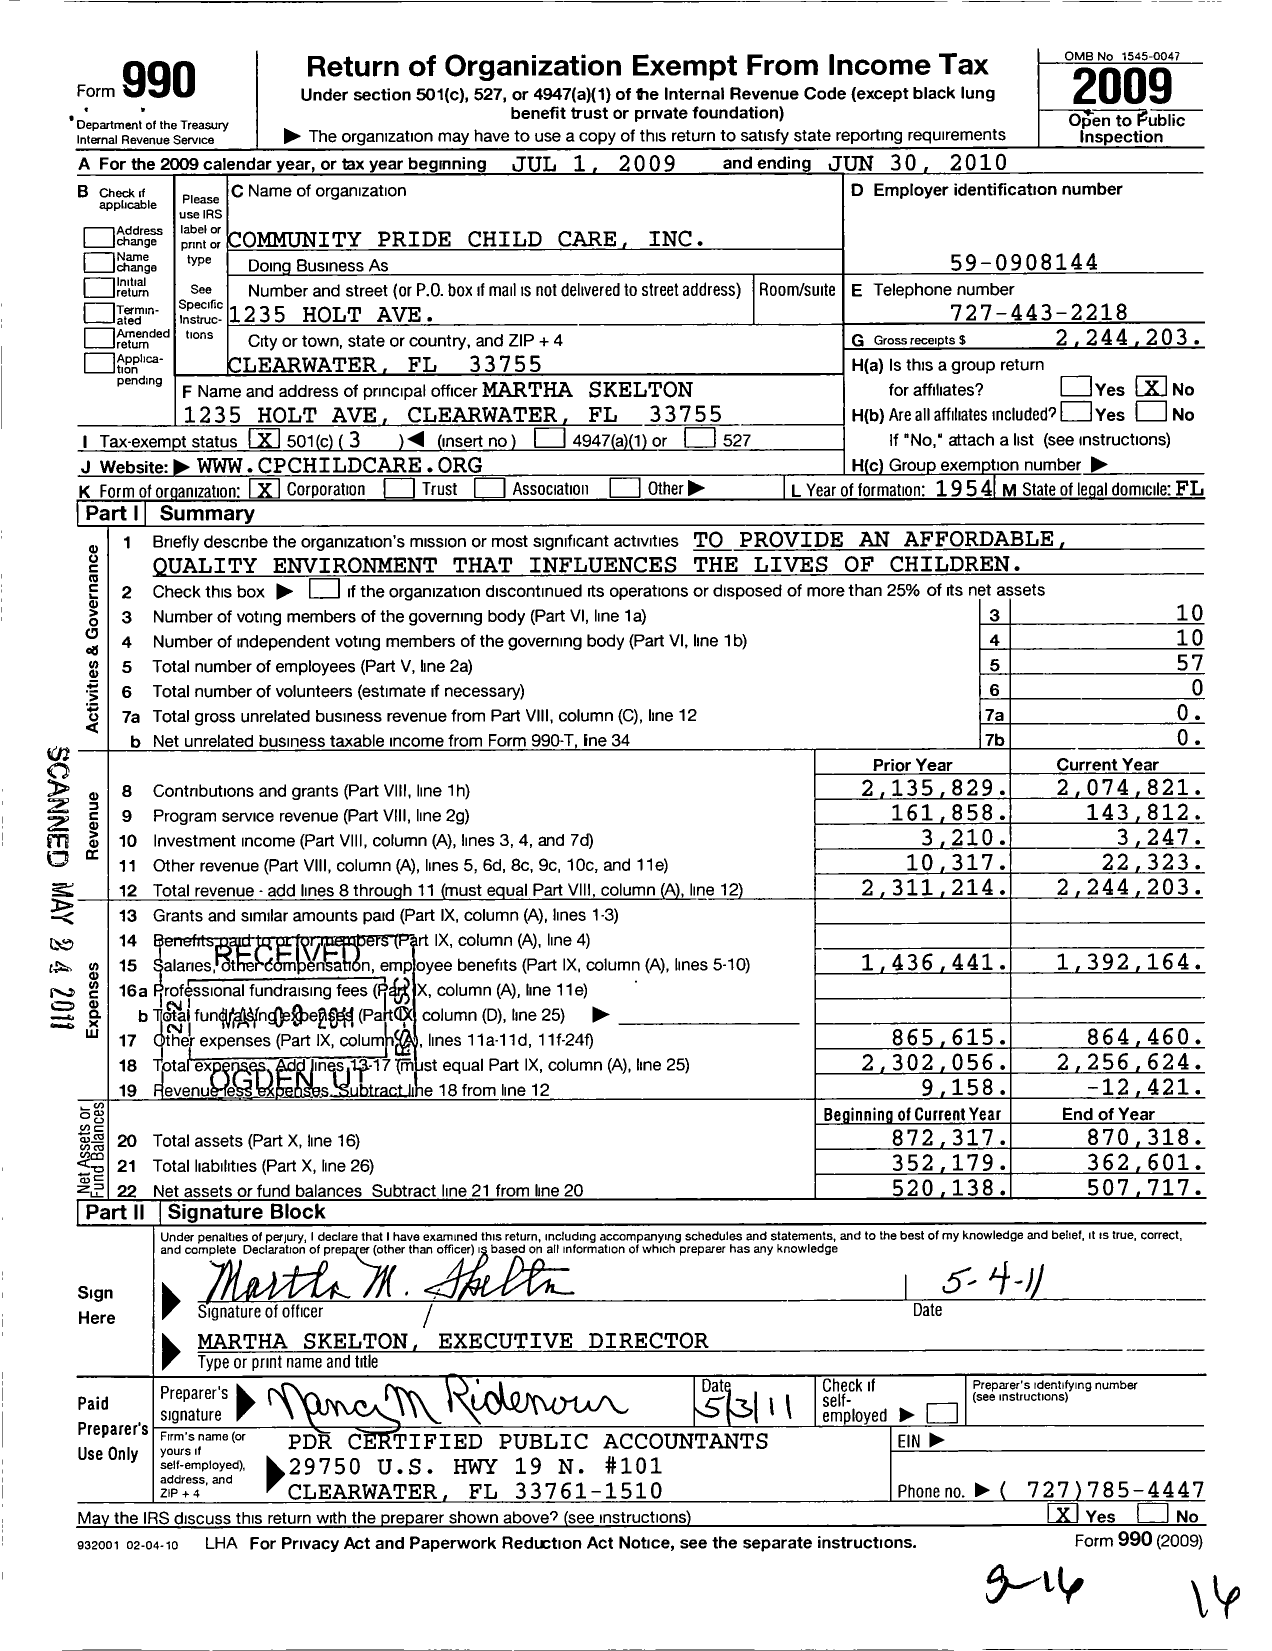 Image of first page of 2009 Form 990 for Community Pride Child Care